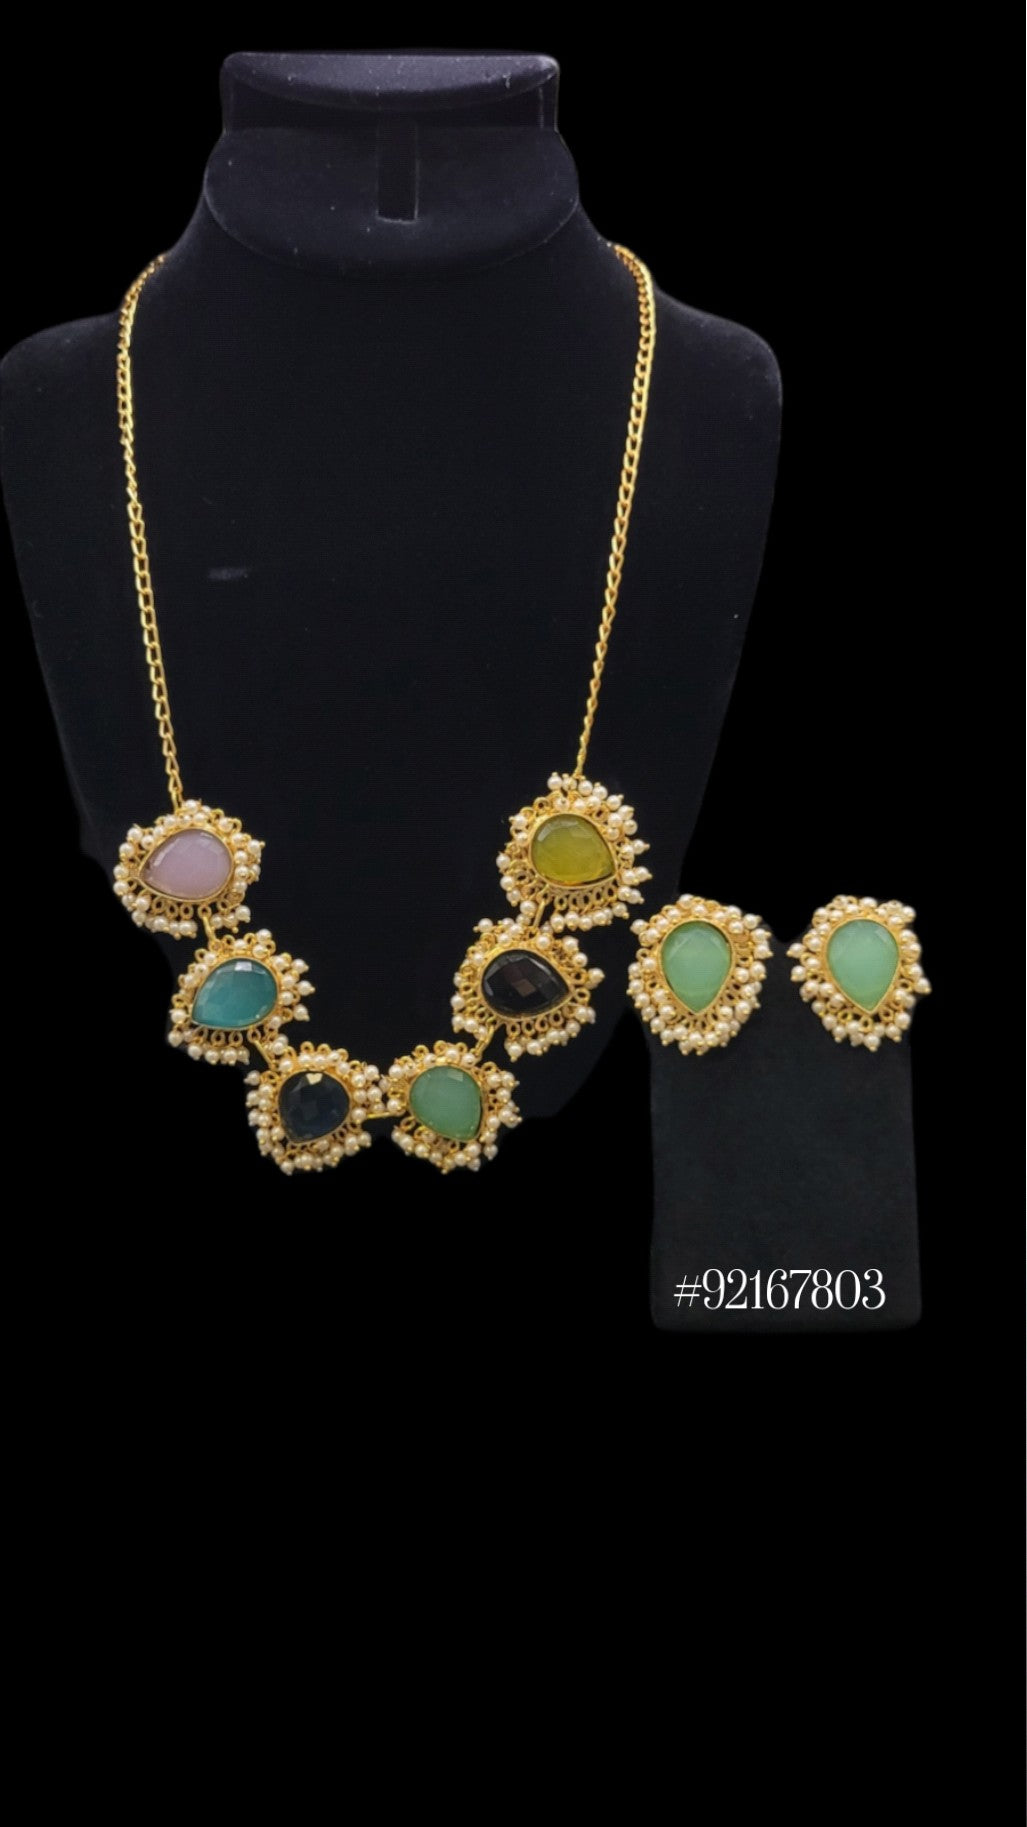 STATEMENT NECKLACE AND EARRINGS